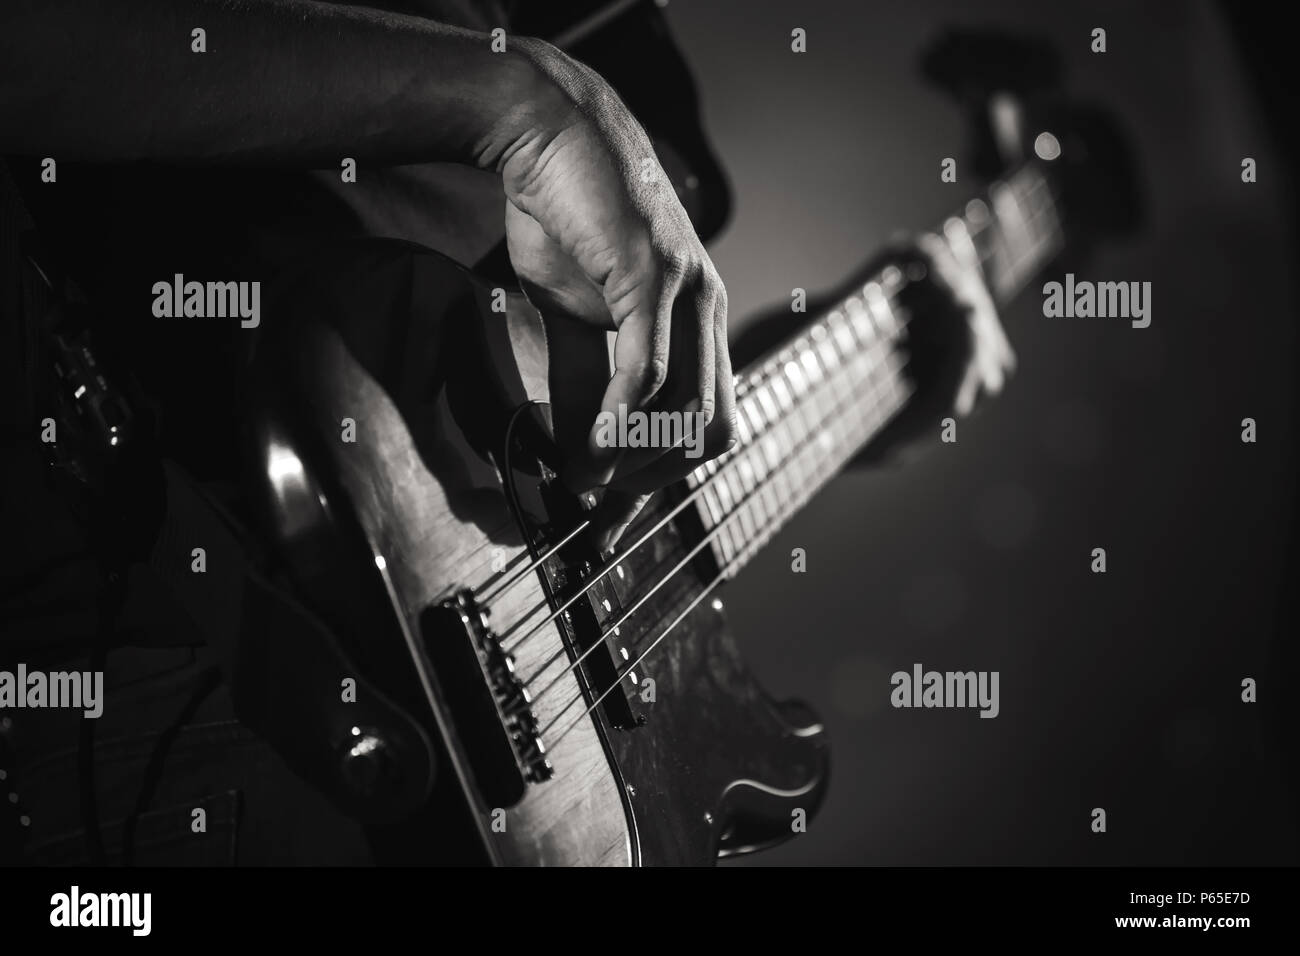 Electric bass guitar player hands, live music theme, close up black and white photo Stock Photo